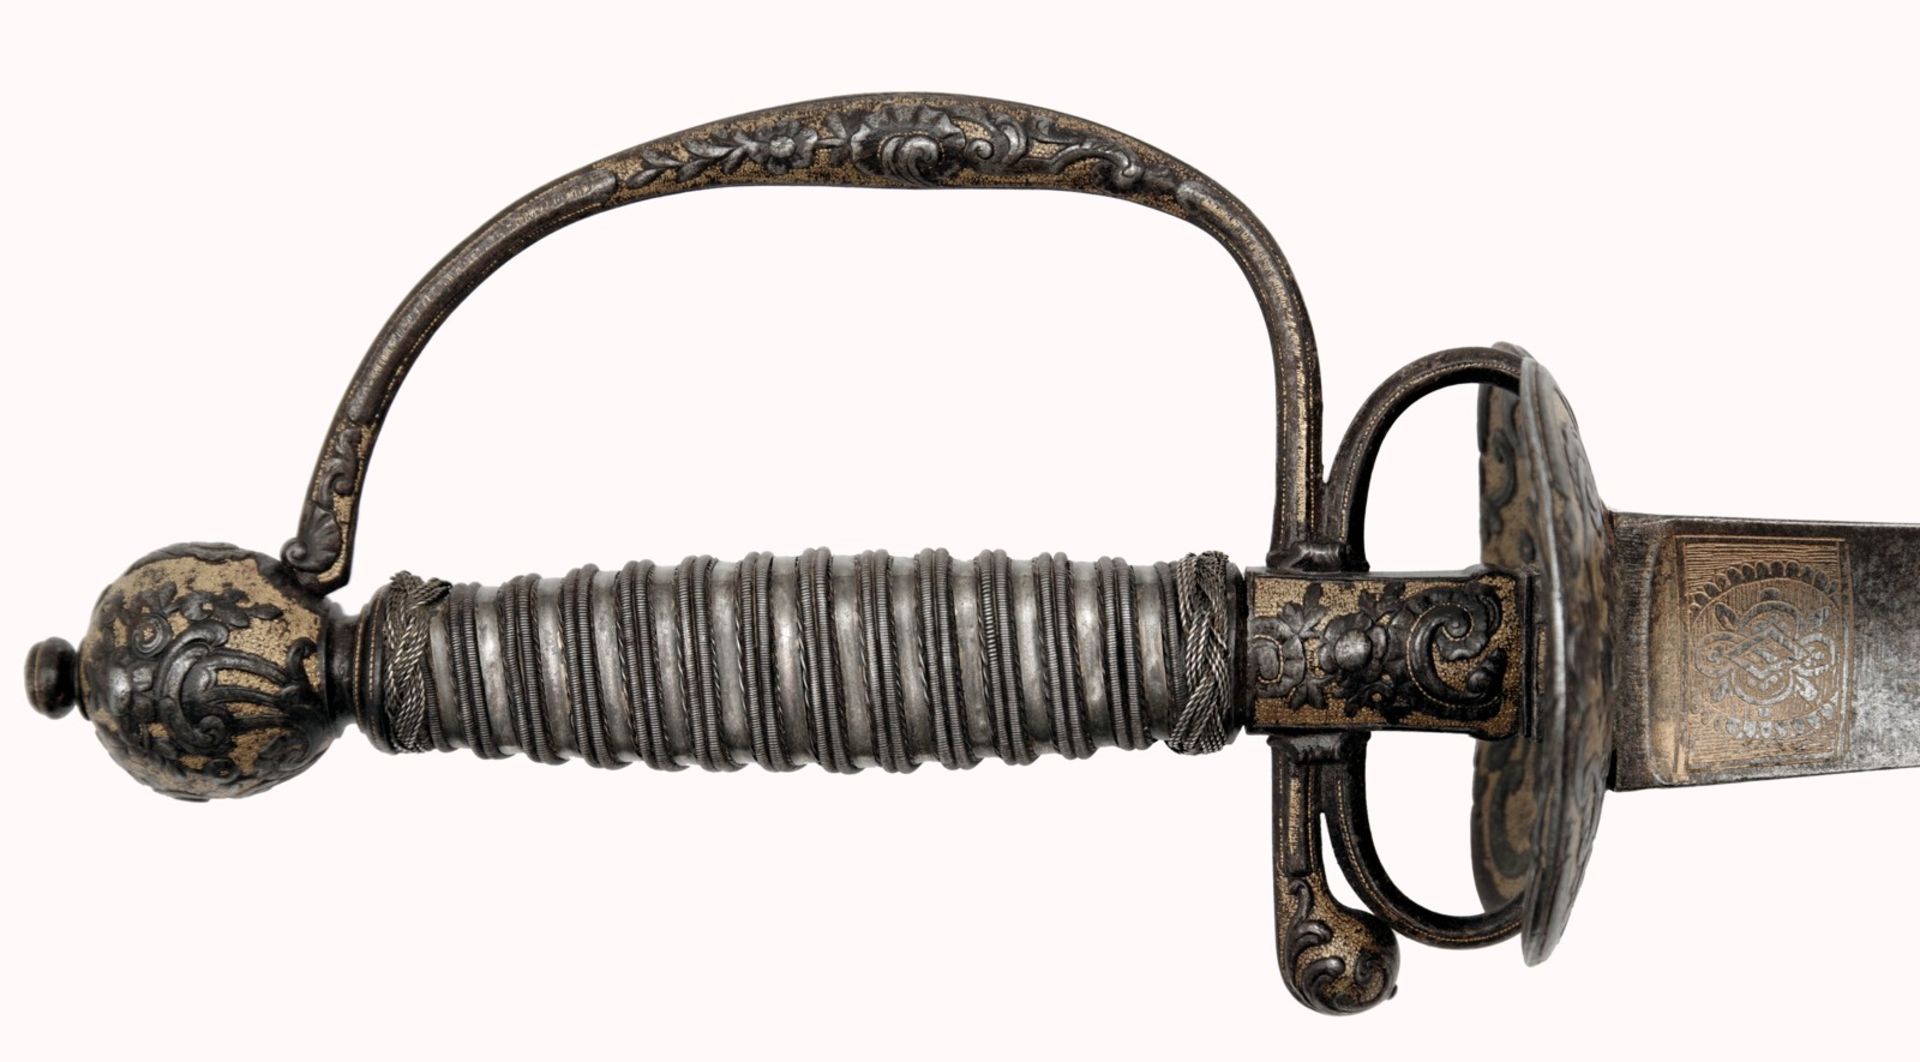 A French Gilt Small-Sword with Chiselled Hilt - Image 3 of 7